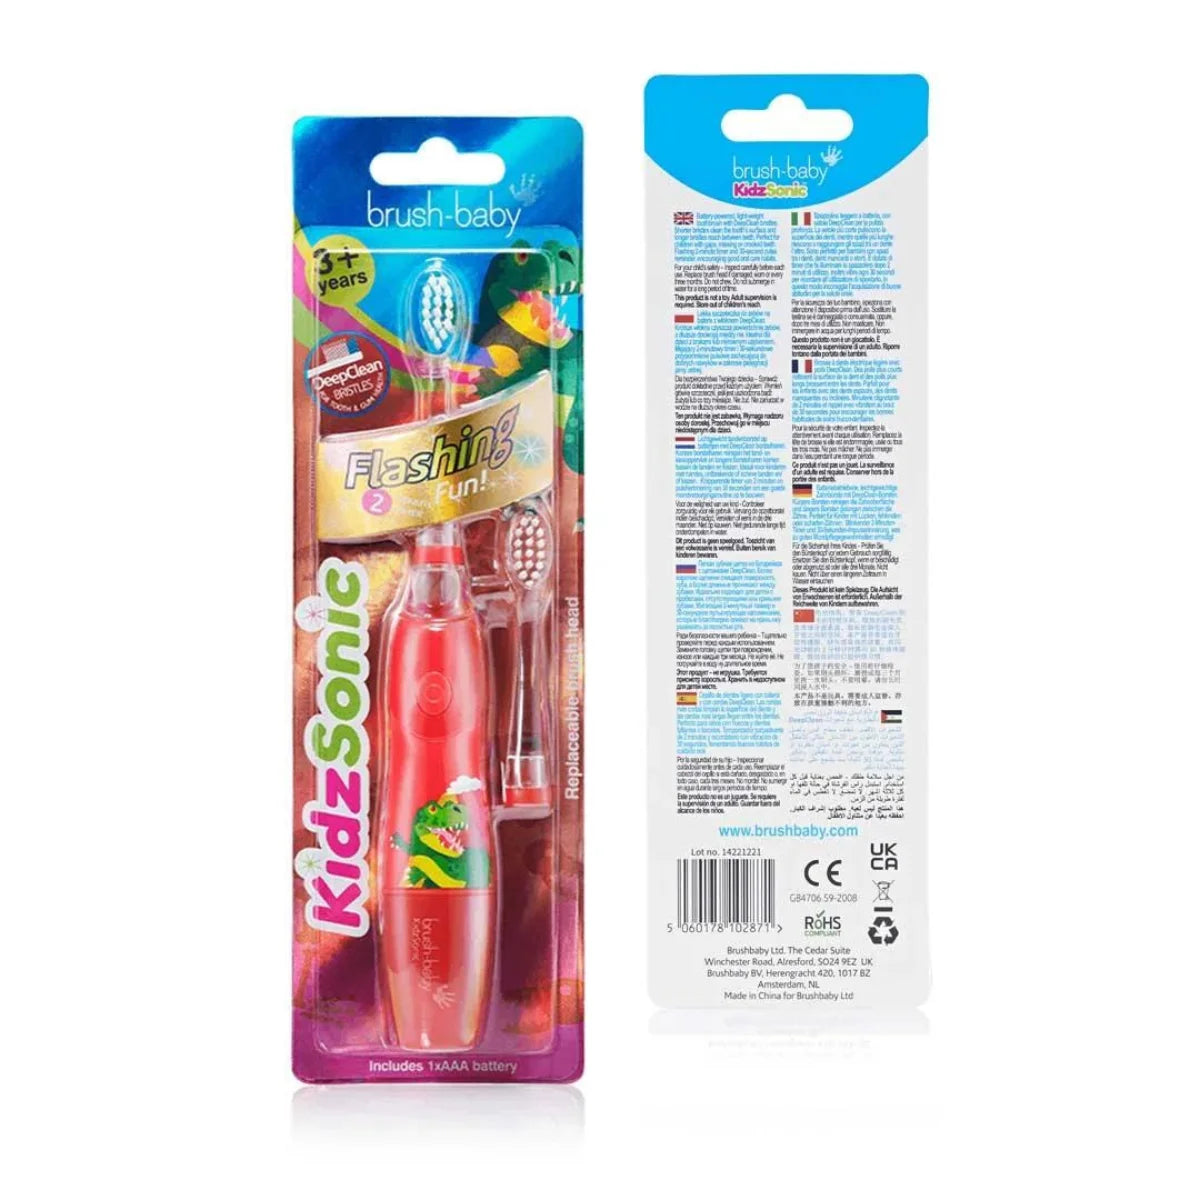 Kids Sonic Electric Toothbrush with replacement brush head packaging